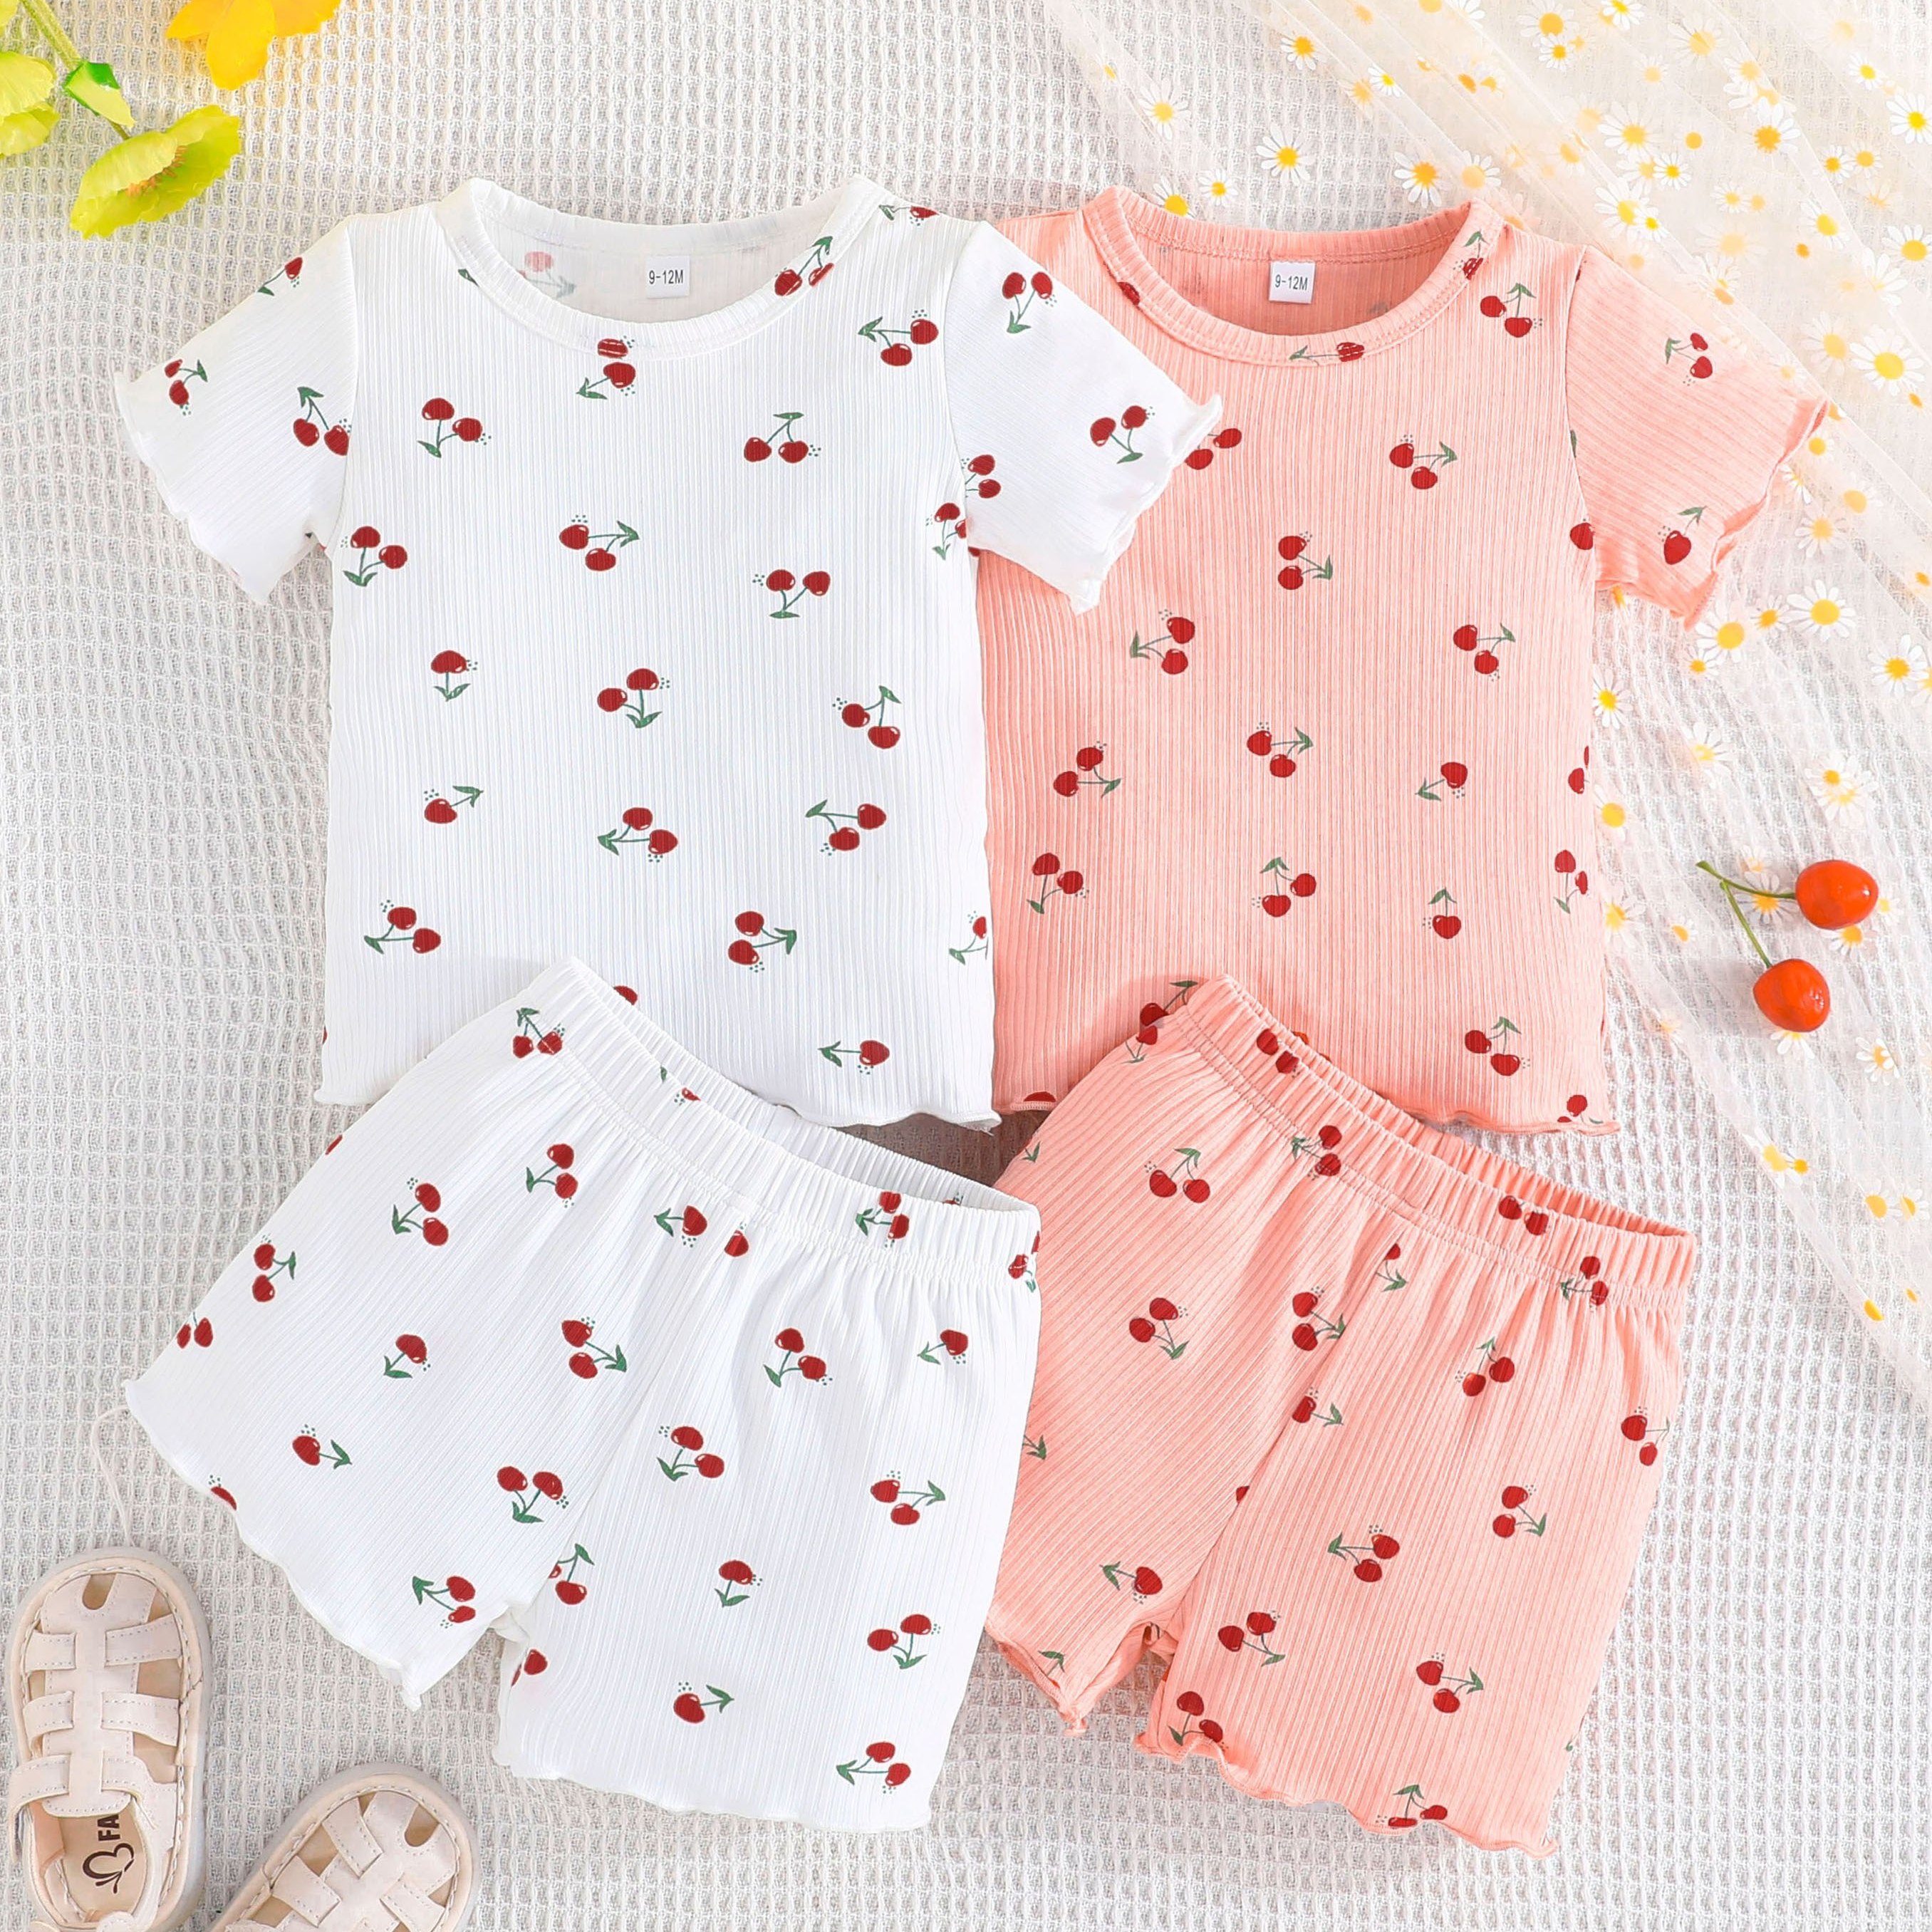 

2 Sets Baby's Cherry Full Print Casual Summer Outfit, Ribbed T-shirt & Shorts Set, Toddler & Infant Girl's Clothes For Daily/holiday/party